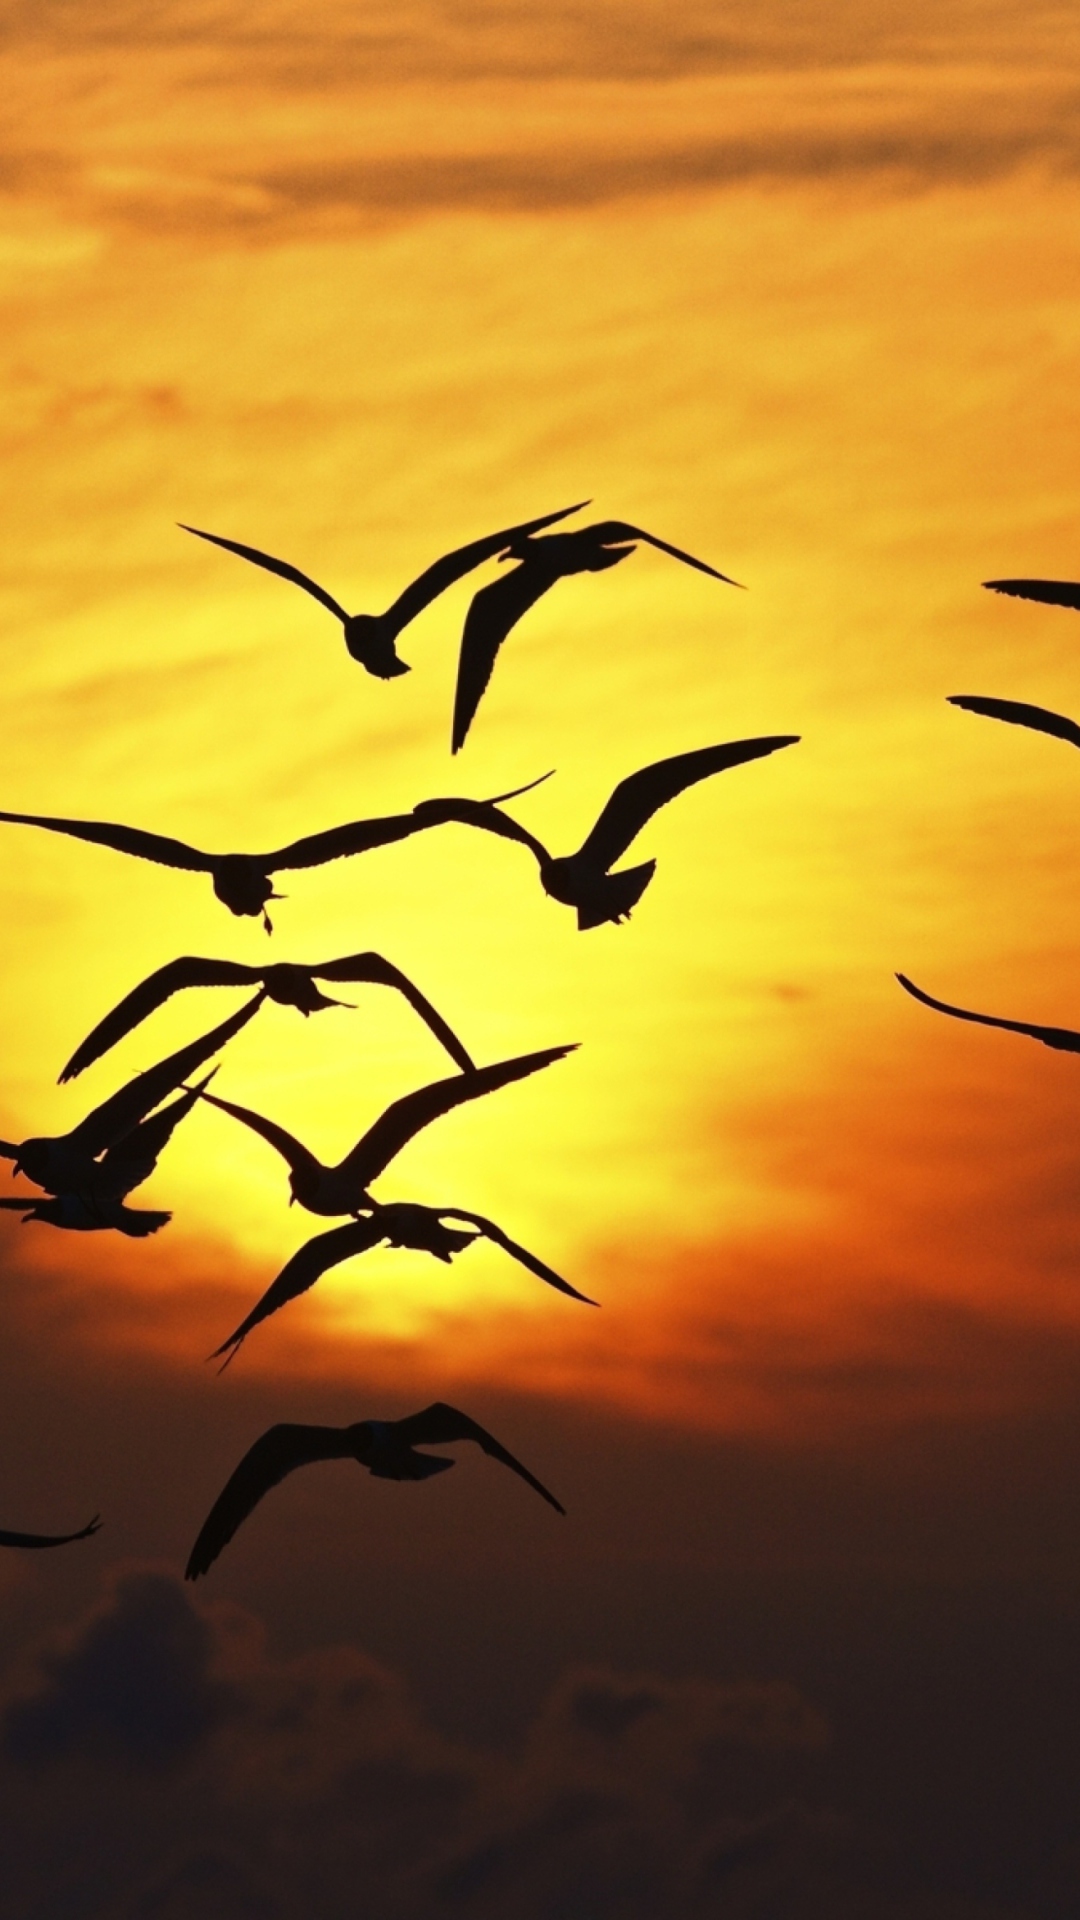 Birds Silhouettes At Sunset wallpaper 1080x1920